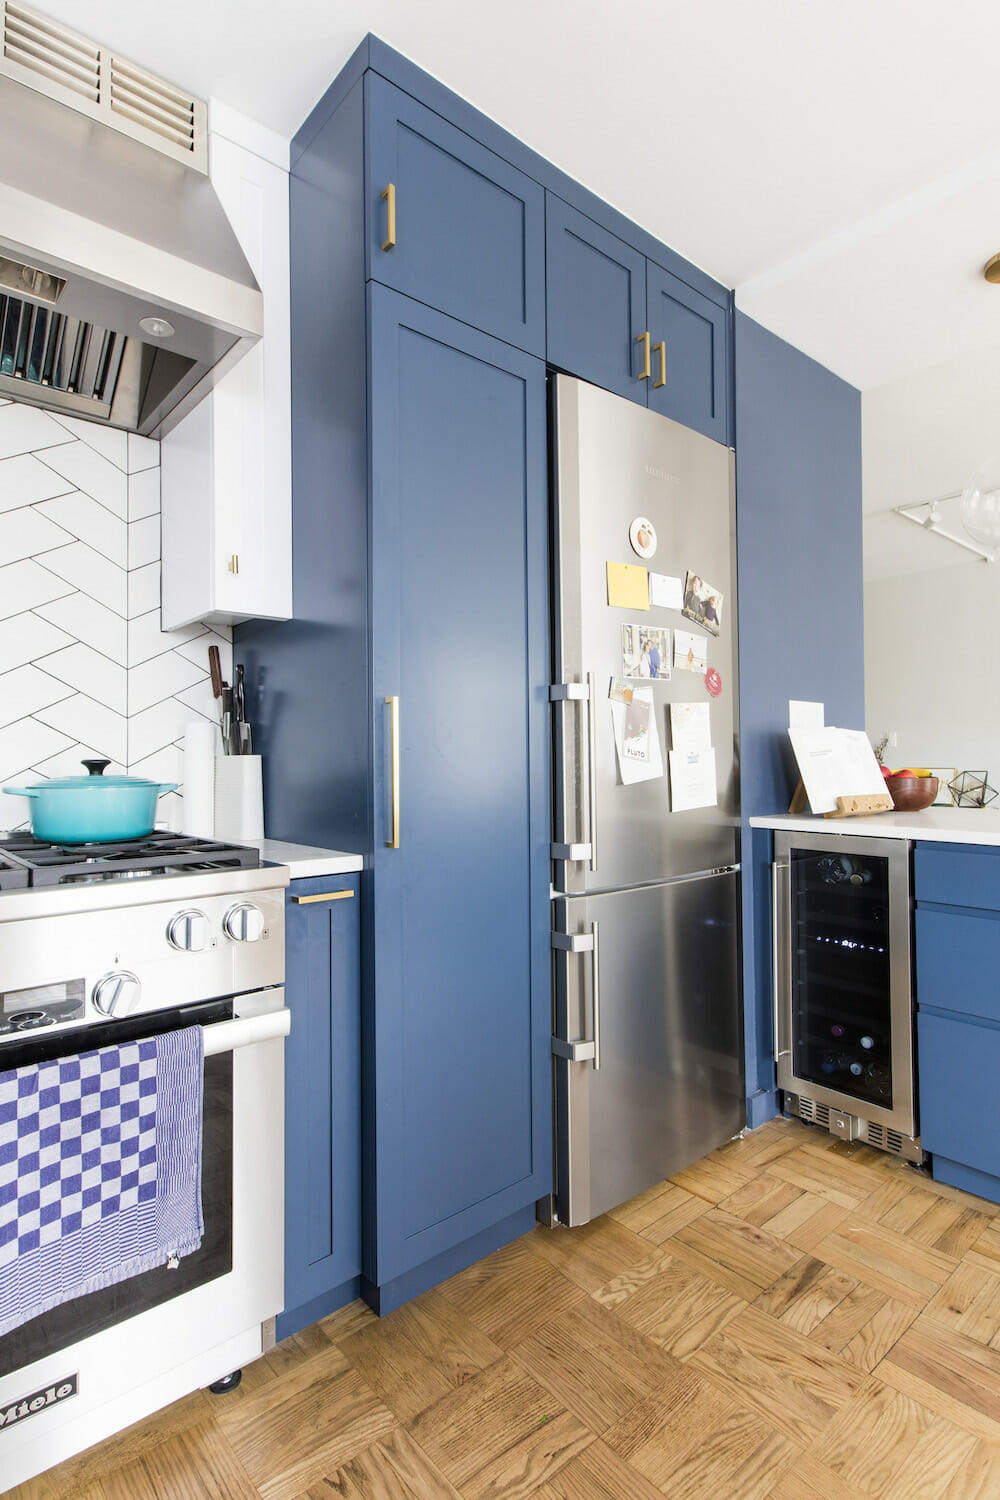 Image of a kitchen with a small wine fridge in corner